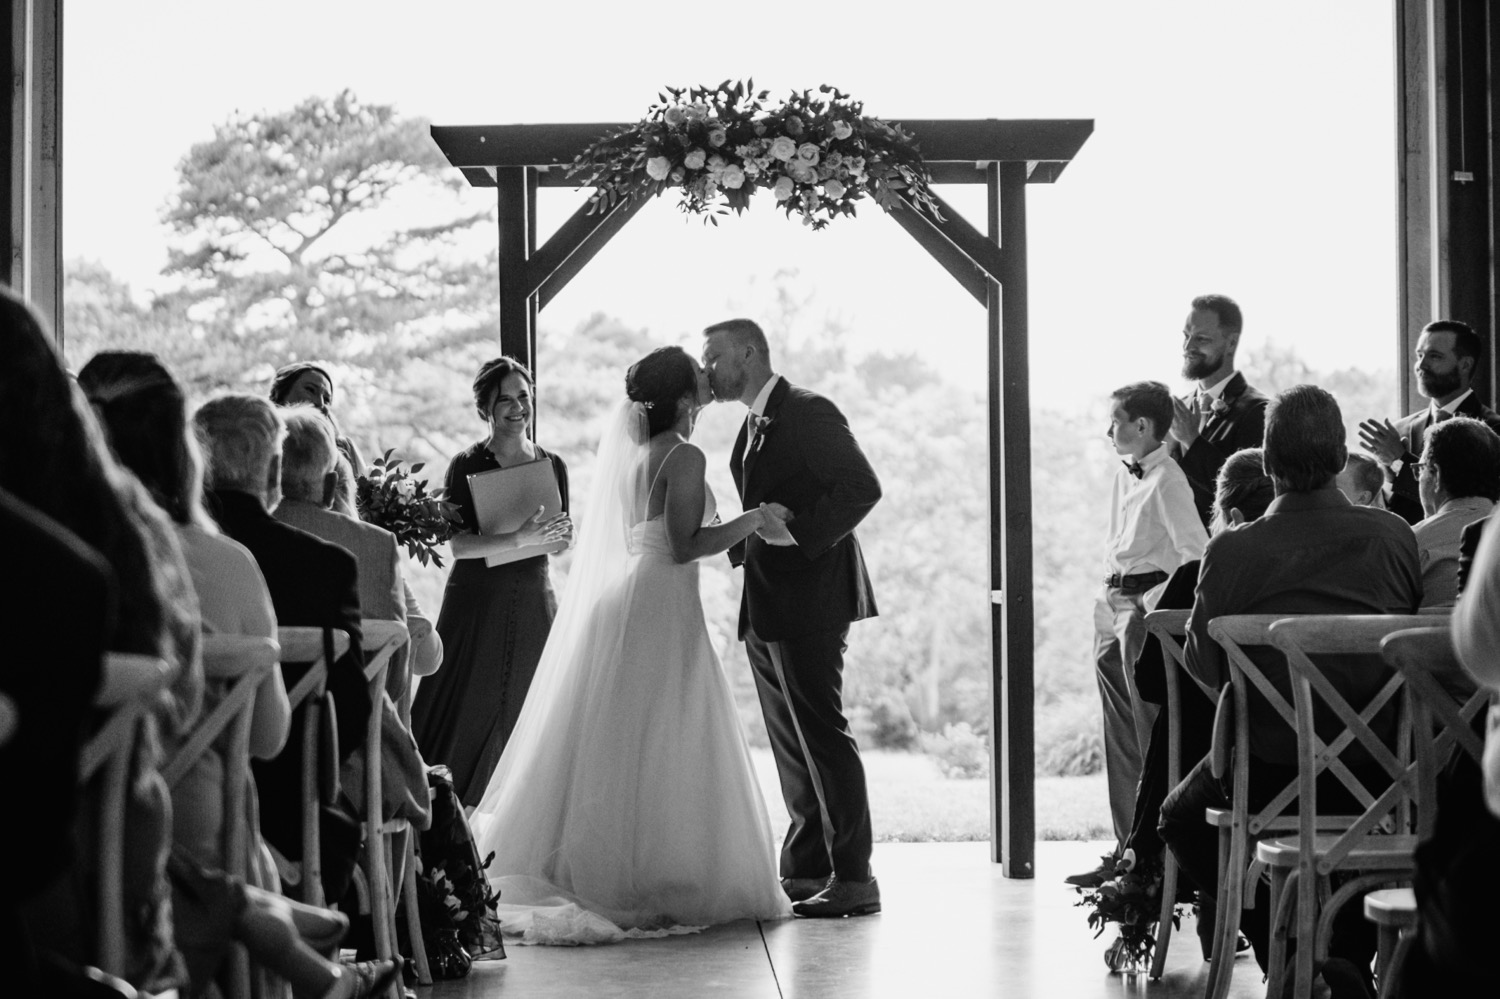 Bride and groom sharing first kiss at the alter in Charlottesville, VA wedding